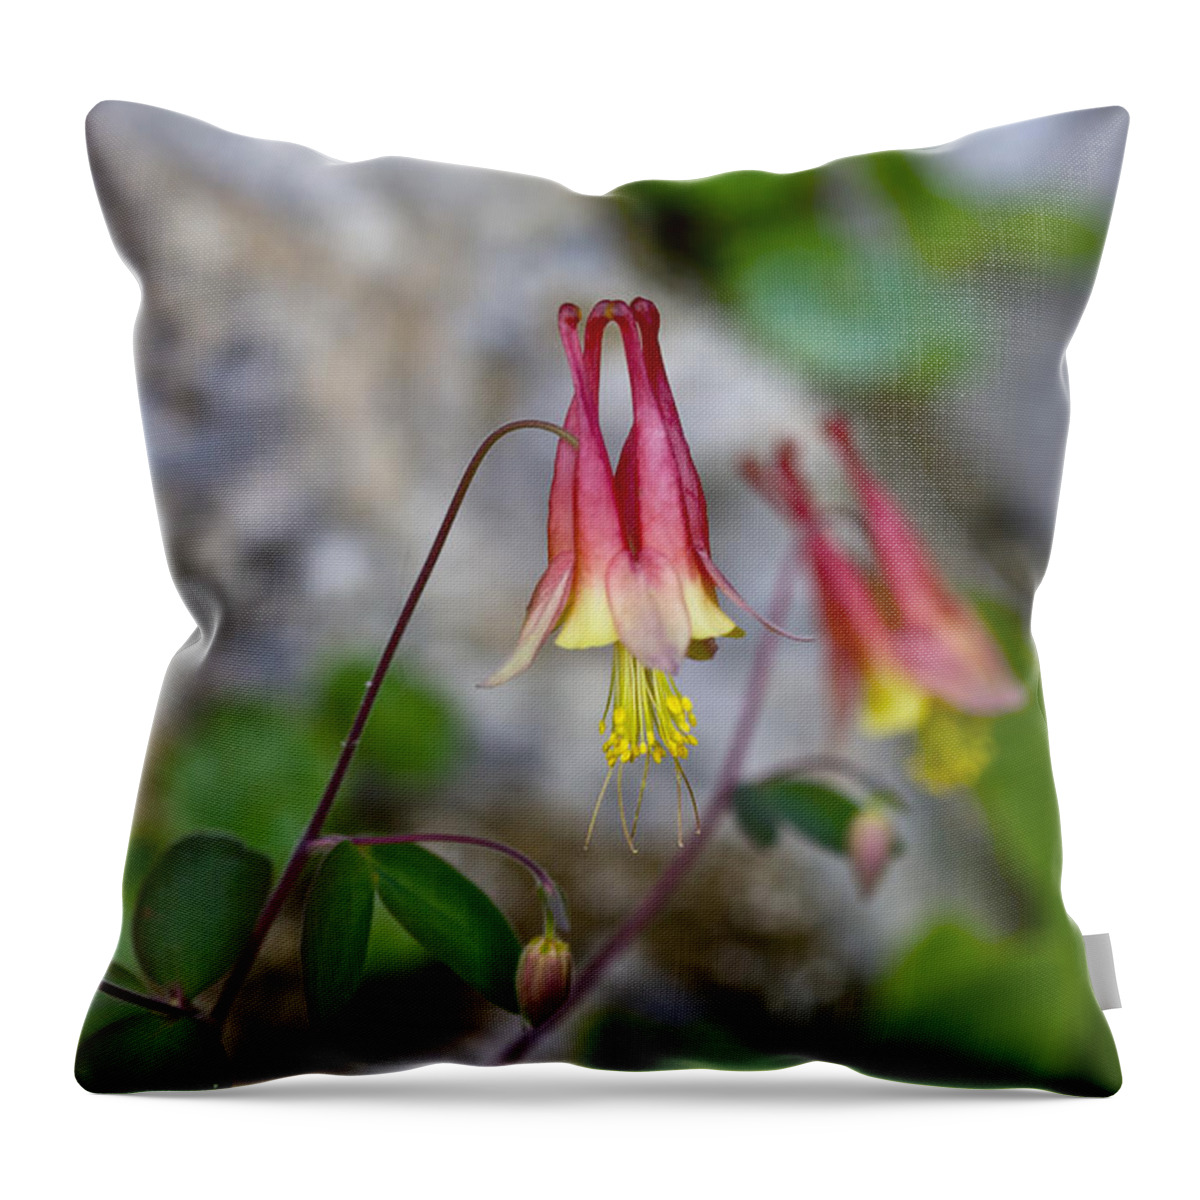 Beautiful Throw Pillow featuring the photograph Columbine by Jack R Perry